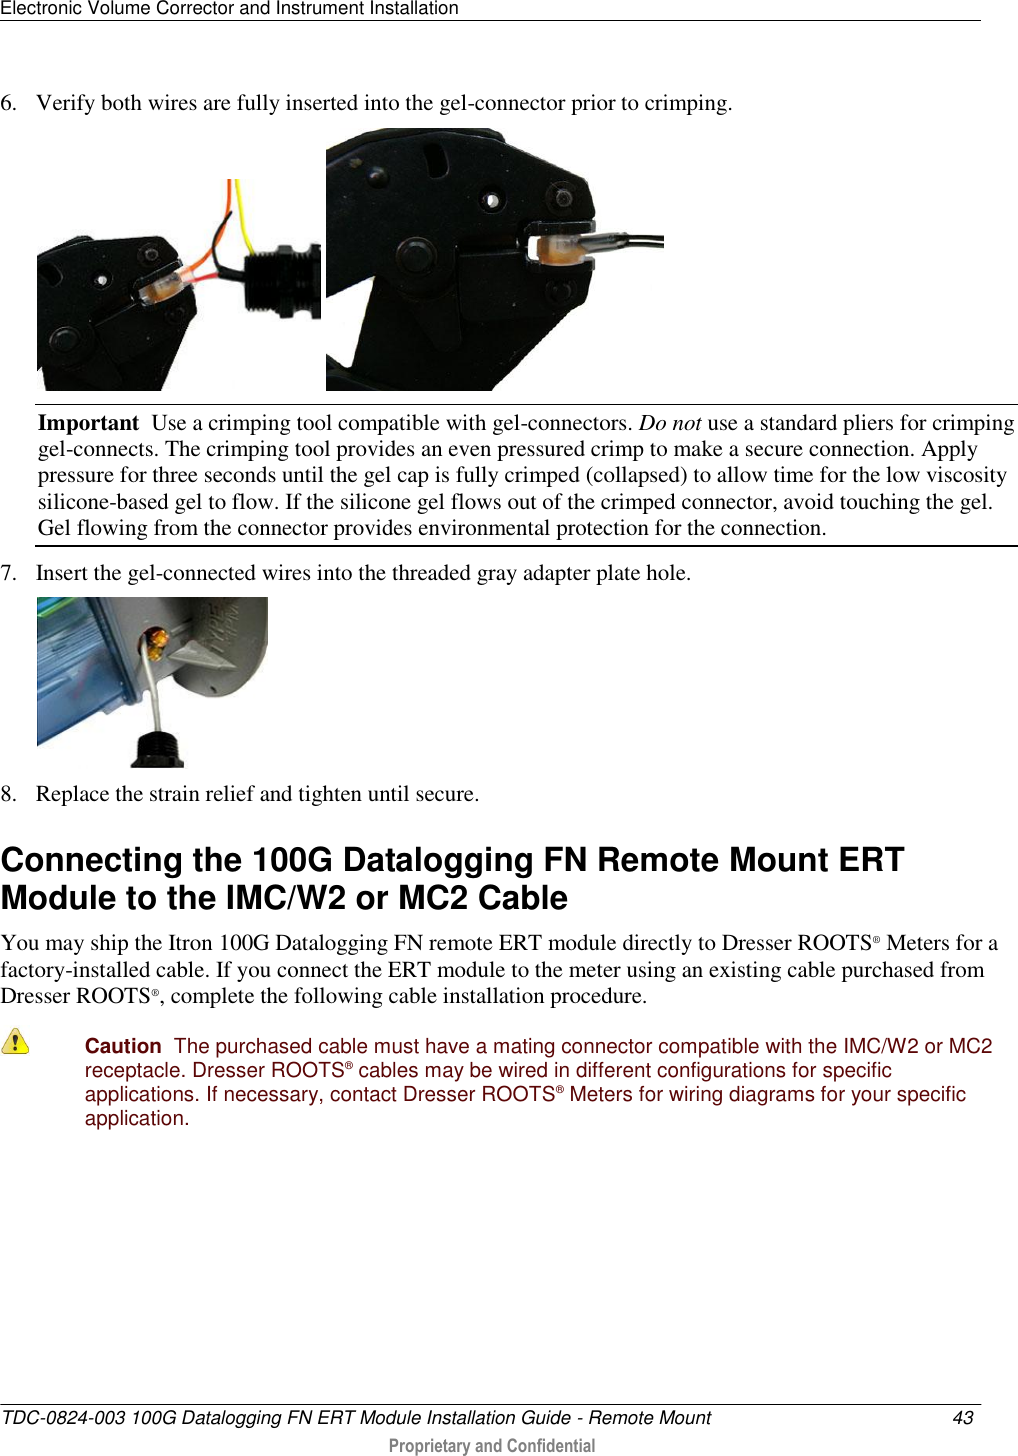 Electronic Volume Corrector and Instrument Installation   TDC-0824-003 100G Datalogging FN ERT Module Installation Guide - Remote Mount  43   Proprietary and Confidential     6. Verify both wires are fully inserted into the gel-connector prior to crimping.     Important  Use a crimping tool compatible with gel-connectors. Do not use a standard pliers for crimping gel-connects. The crimping tool provides an even pressured crimp to make a secure connection. Apply pressure for three seconds until the gel cap is fully crimped (collapsed) to allow time for the low viscosity silicone-based gel to flow. If the silicone gel flows out of the crimped connector, avoid touching the gel. Gel flowing from the connector provides environmental protection for the connection.  7. Insert the gel-connected wires into the threaded gray adapter plate hole.  8. Replace the strain relief and tighten until secure.   Connecting the 100G Datalogging FN Remote Mount ERT Module to the IMC/W2 or MC2 Cable You may ship the Itron 100G Datalogging FN remote ERT module directly to Dresser ROOTS® Meters for a factory-installed cable. If you connect the ERT module to the meter using an existing cable purchased from Dresser ROOTS®, complete the following cable installation procedure.  Caution  The purchased cable must have a mating connector compatible with the IMC/W2 or MC2 receptacle. Dresser ROOTS® cables may be wired in different configurations for specific applications. If necessary, contact Dresser ROOTS® Meters for wiring diagrams for your specific application.     